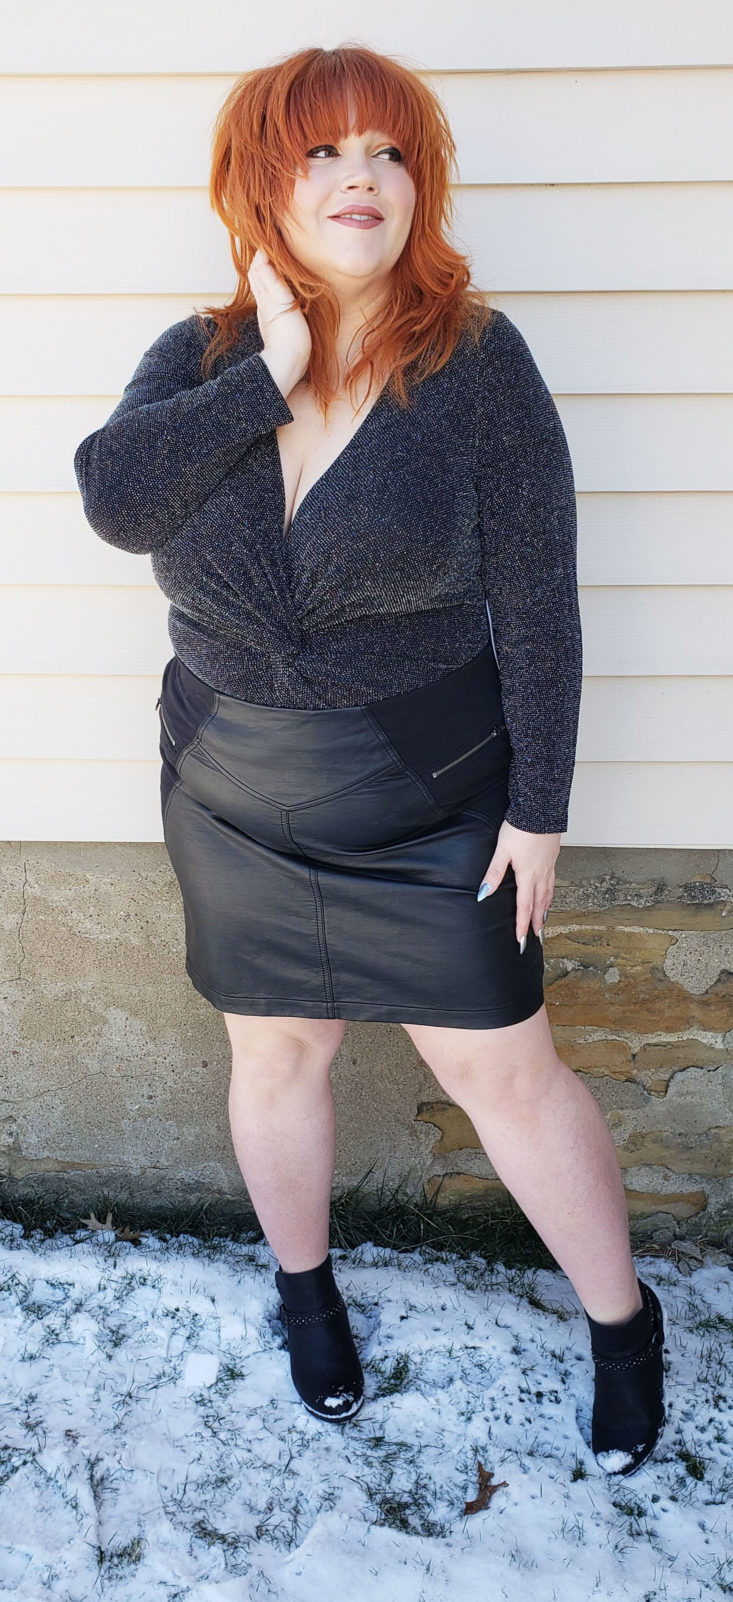 Nordstrom Trunk Box February 2019 - Sparkle Bodysuit by Leith Size 3x 1